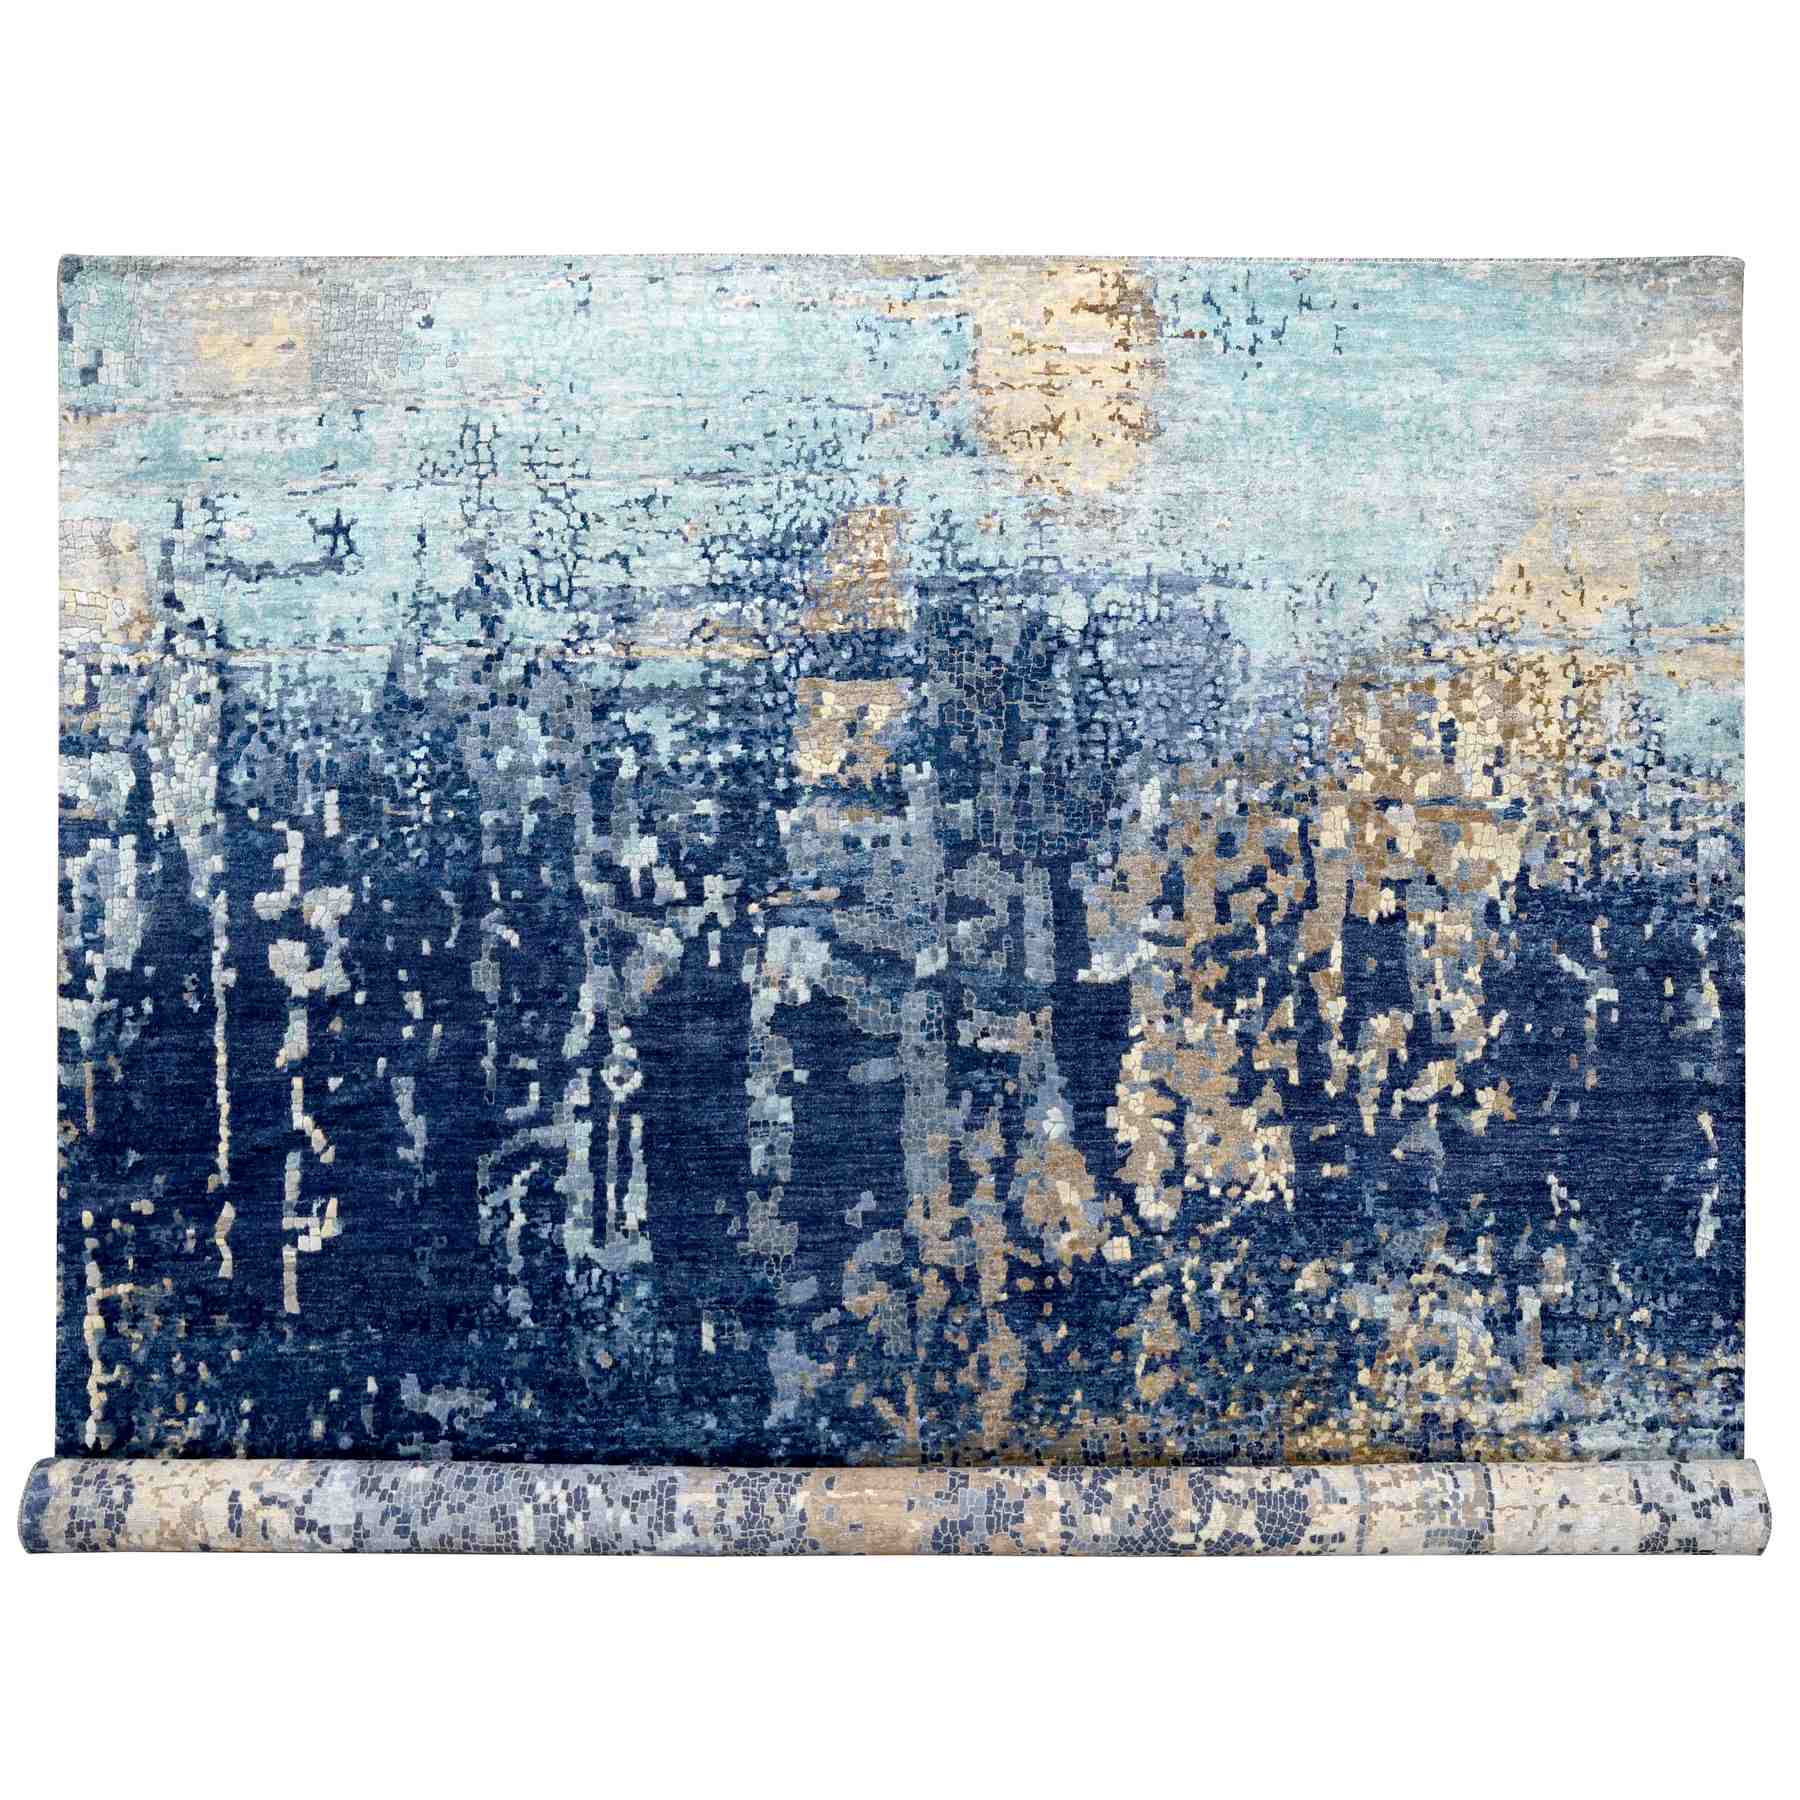 Clearance Muted Semi-Antique Kirman 10x12 Area Rug Hand-knotted